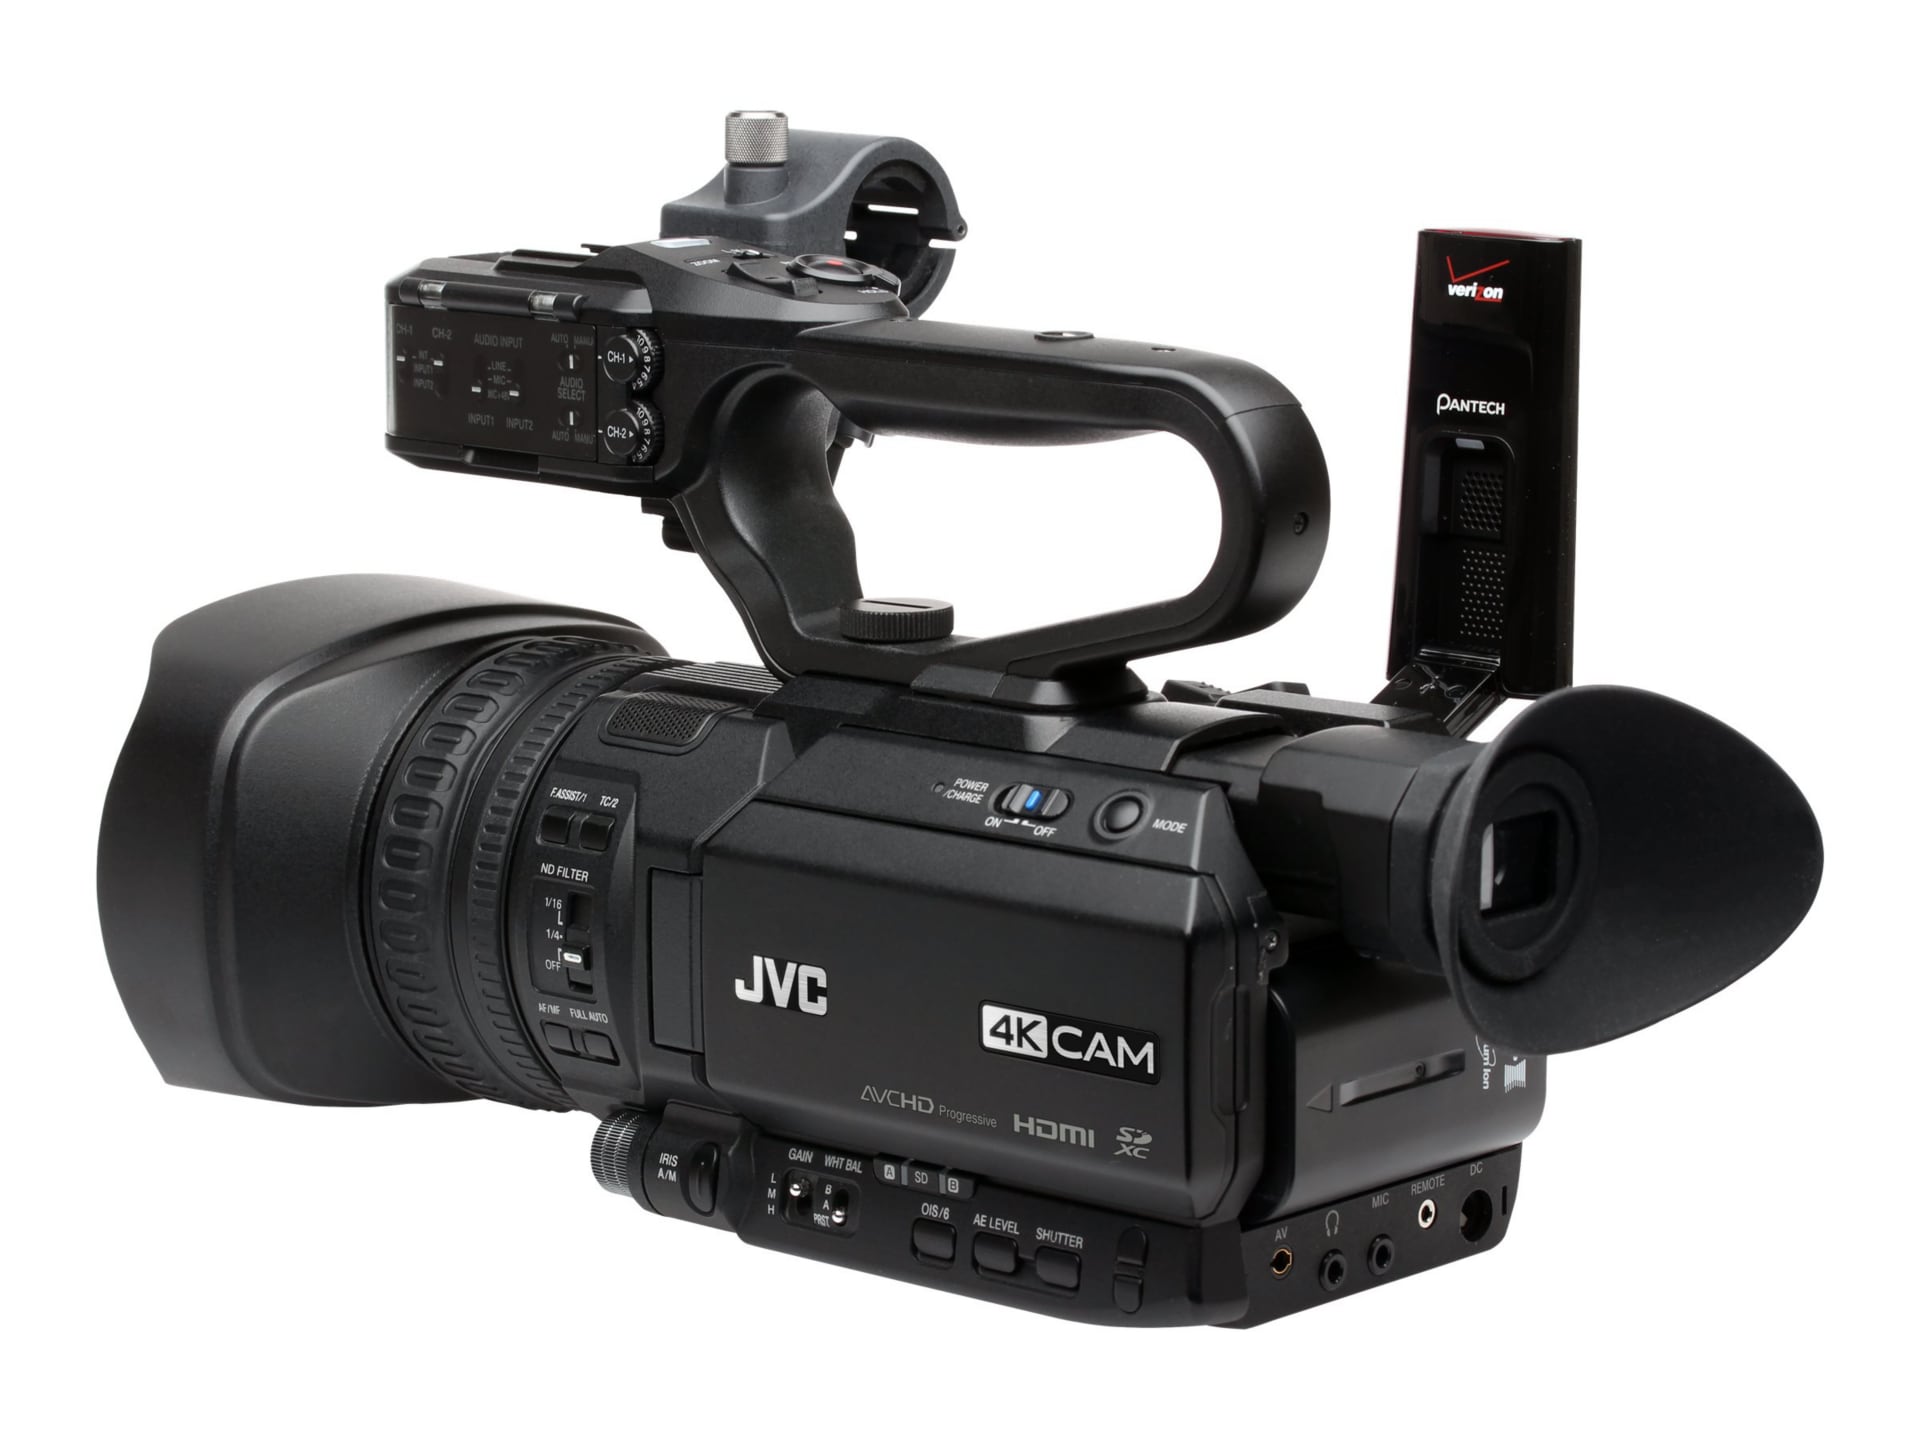 JVC 4K UHD Compact Handheld Streaming Camcorder Integrated 12x Lens - GY-HM250U Video Cameras -